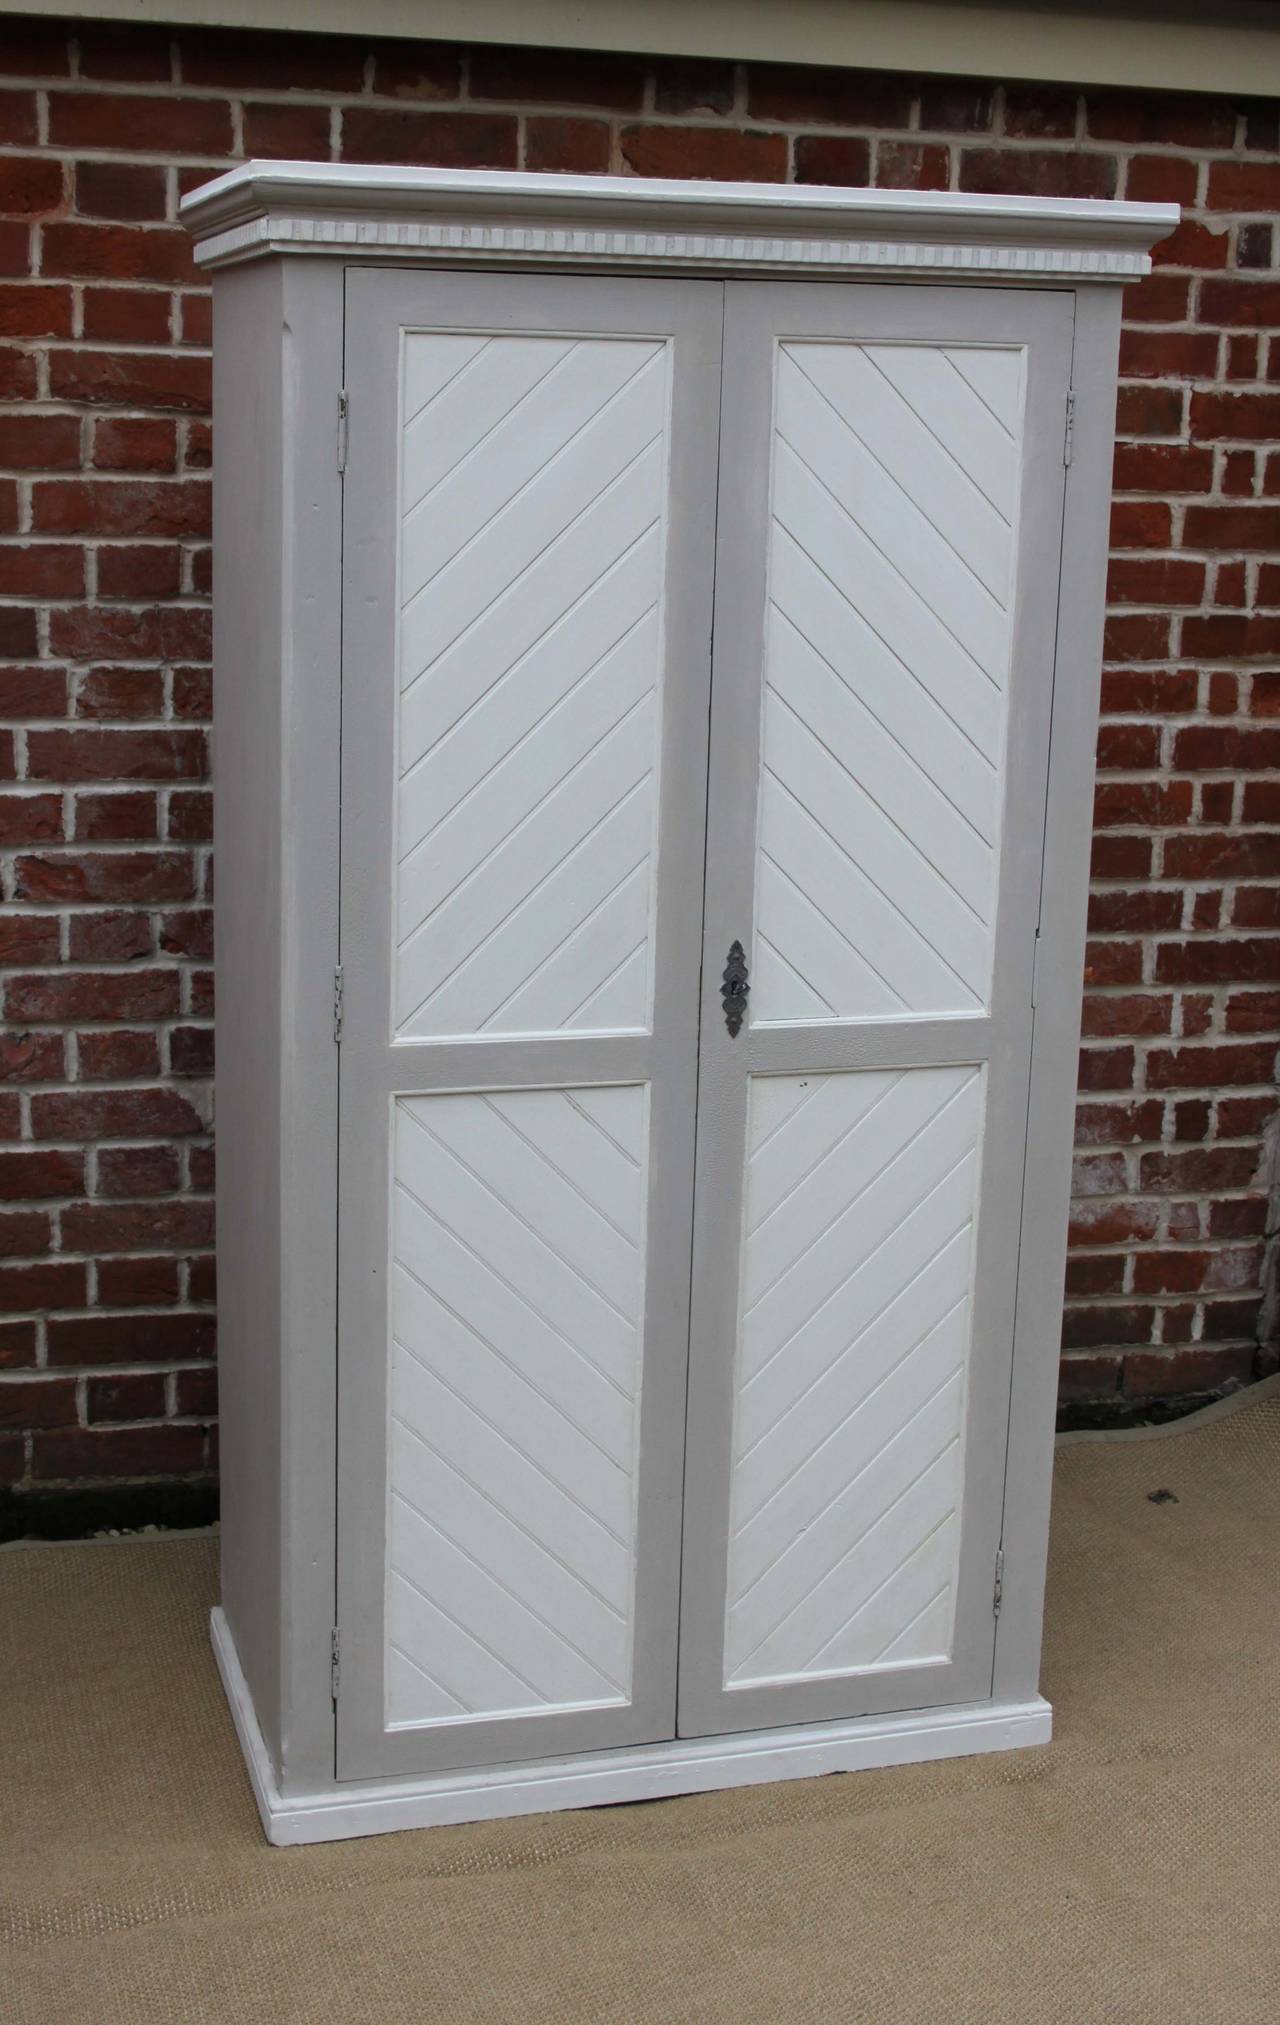 Painted wardrobe having two panelled doors and a moudled top.Can be fitted with a hanging rail or shelves